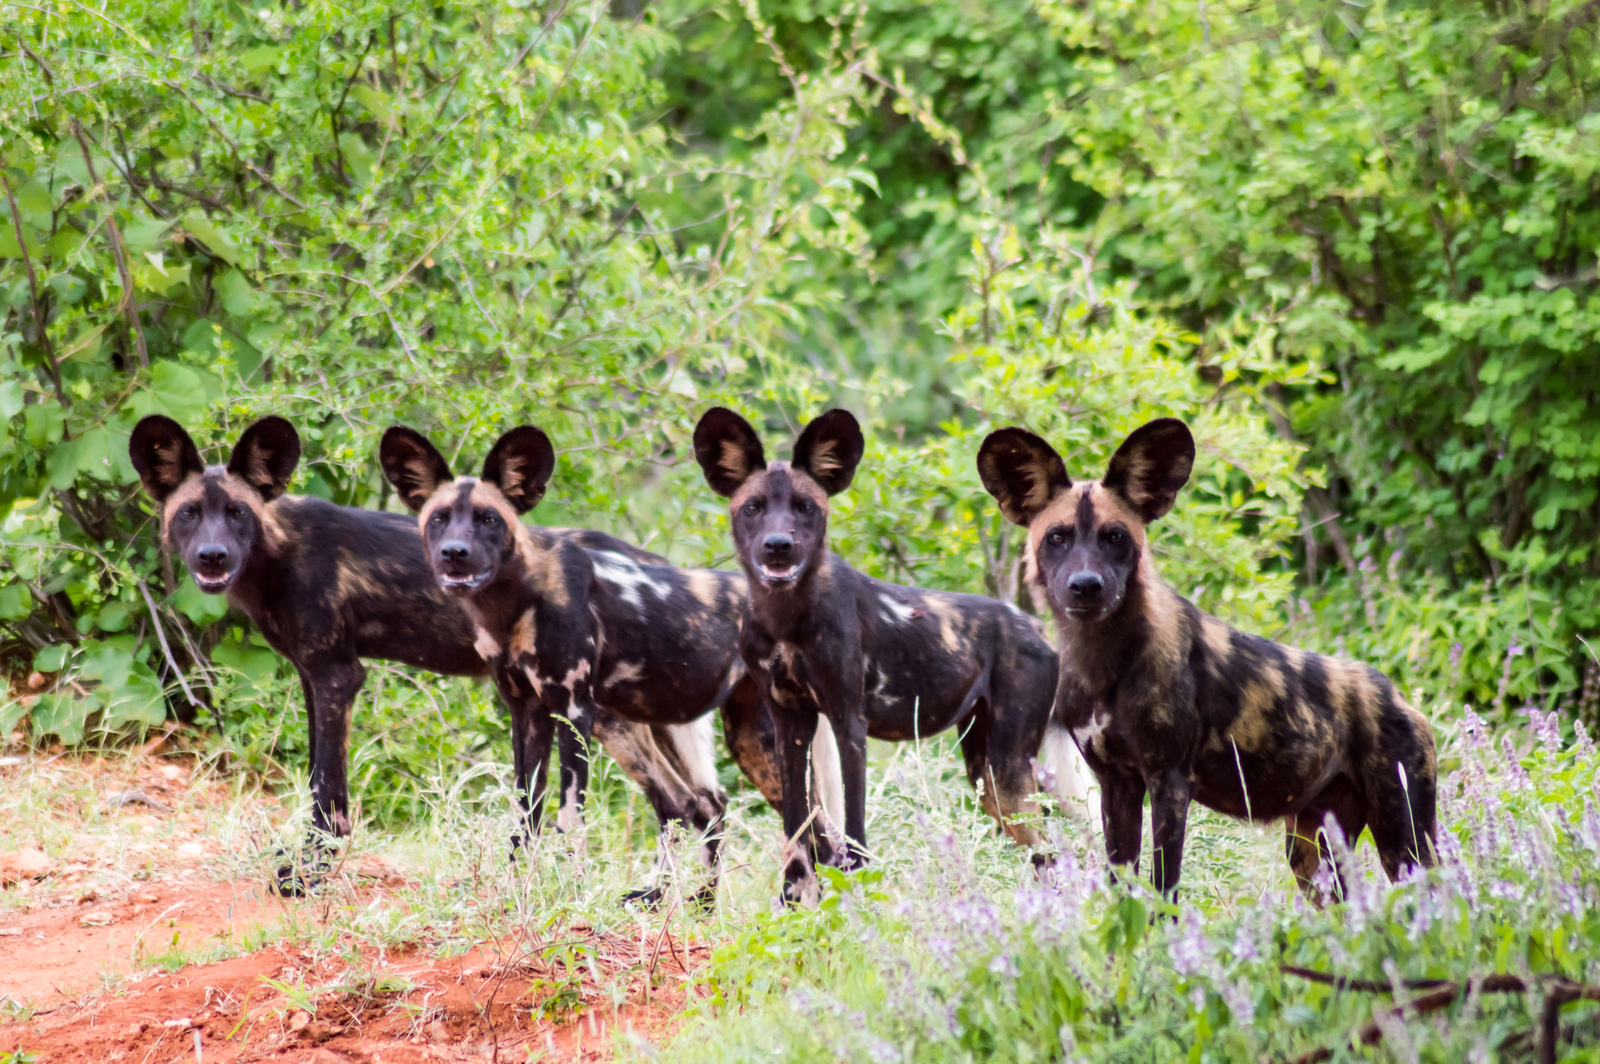 A pack of African wild dogs in Tsavo West Park, Kenya. Image Credit: © Philippe Demande | Dreamstime.com.